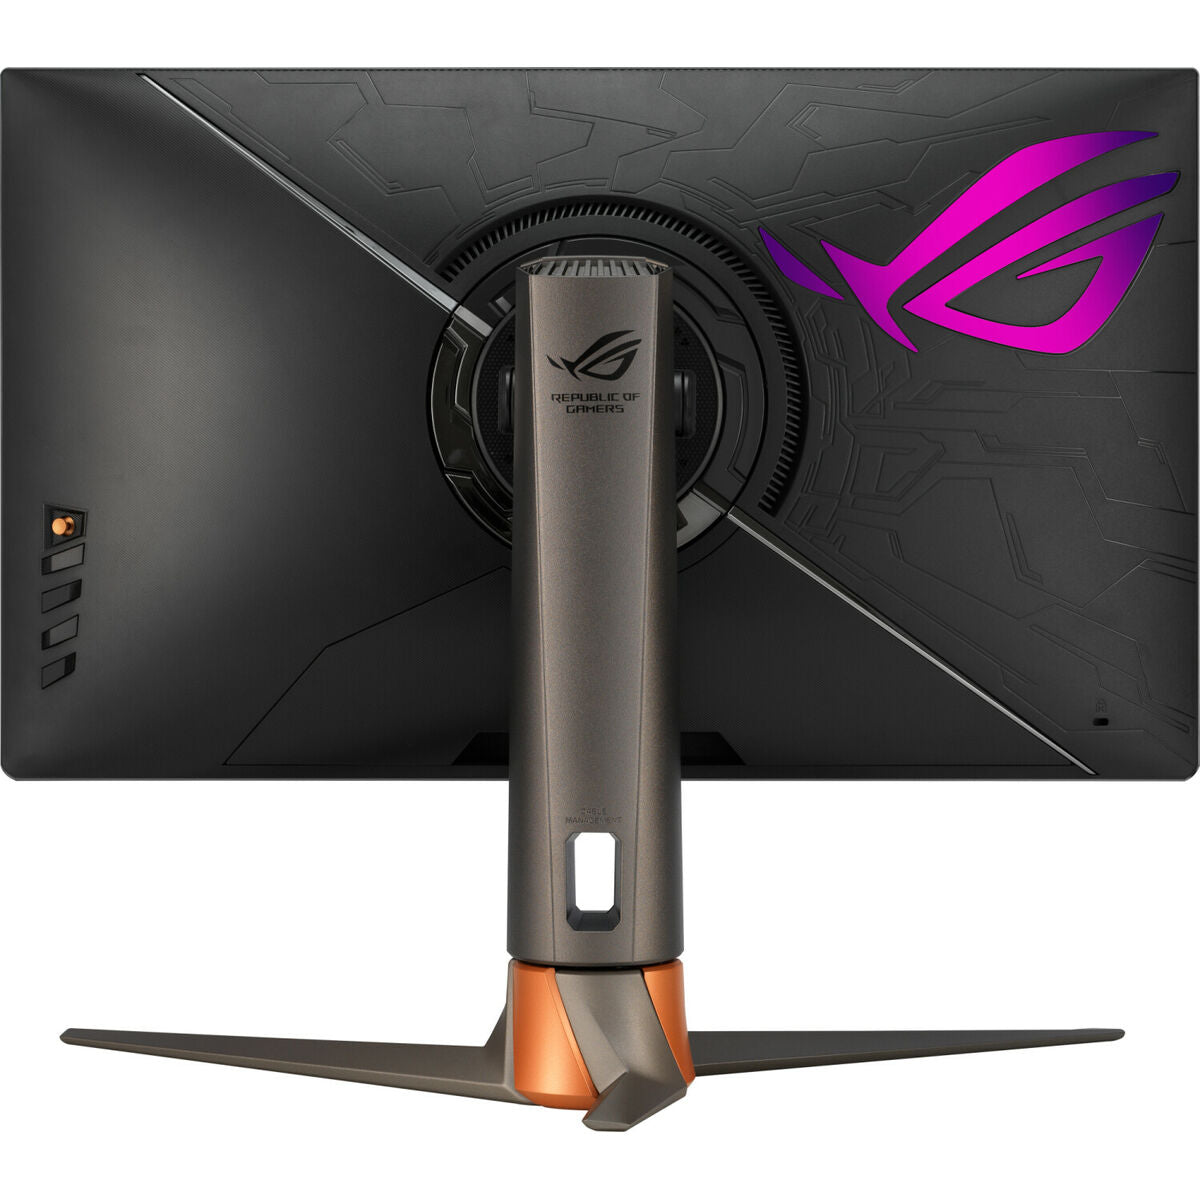 Gaming Monitor Asus ROG Swift PG27AQN 27" LED IPS HDR10 Flicker free, Asus, Computing, gaming-monitor-asus-rog-swift-pg27aqn-27-led-ips-hdr10-flicker-free, Brand_Asus, category-reference-2609, category-reference-2642, category-reference-2644, category-reference-t-19685, computers / peripherals, Condition_NEW, office, Price_+ 1000, Teleworking, RiotNook